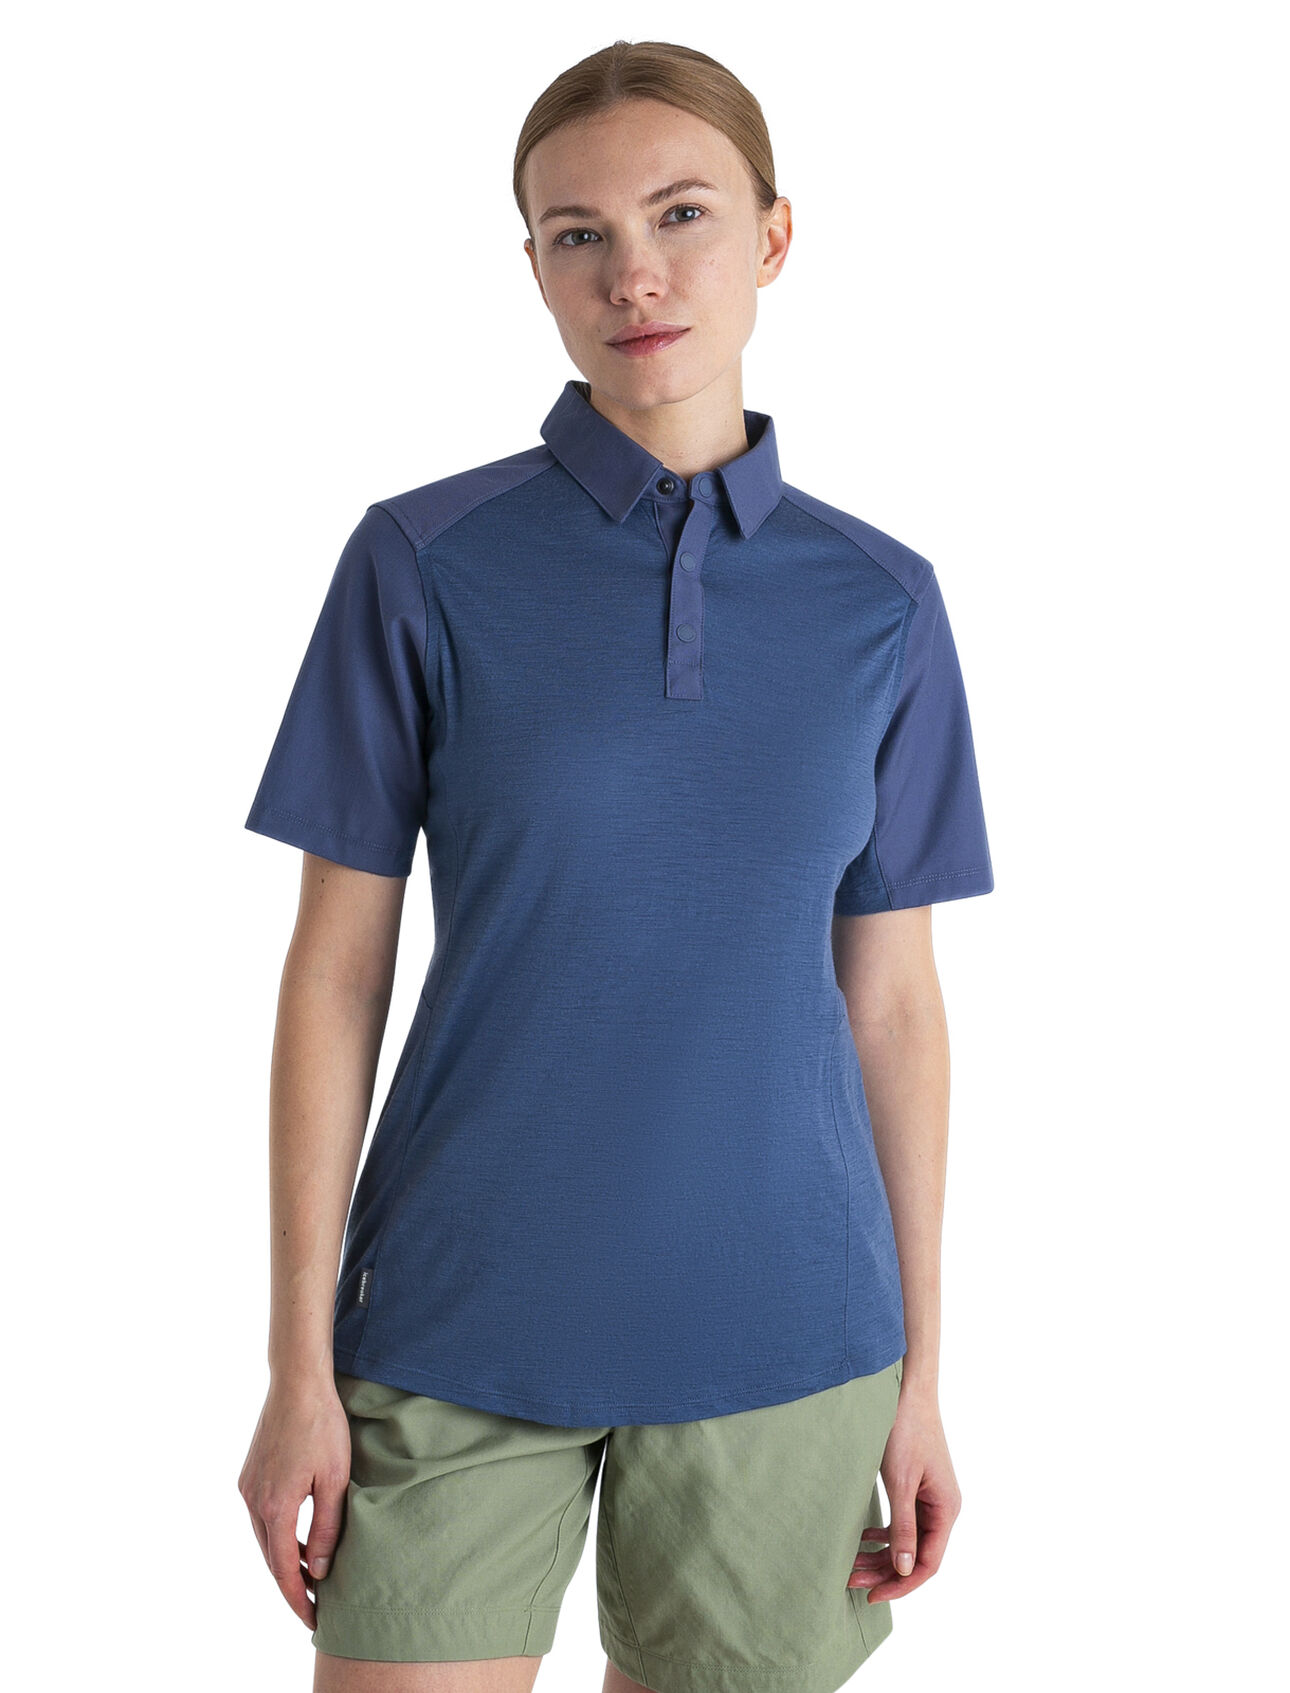 Womens Merino Hike Short Sleeve Top A lightweight and breathable merino shirt ideal for mountain adventures, the Hike Short Sleeve Top also provides the casual style for whatever comes after.